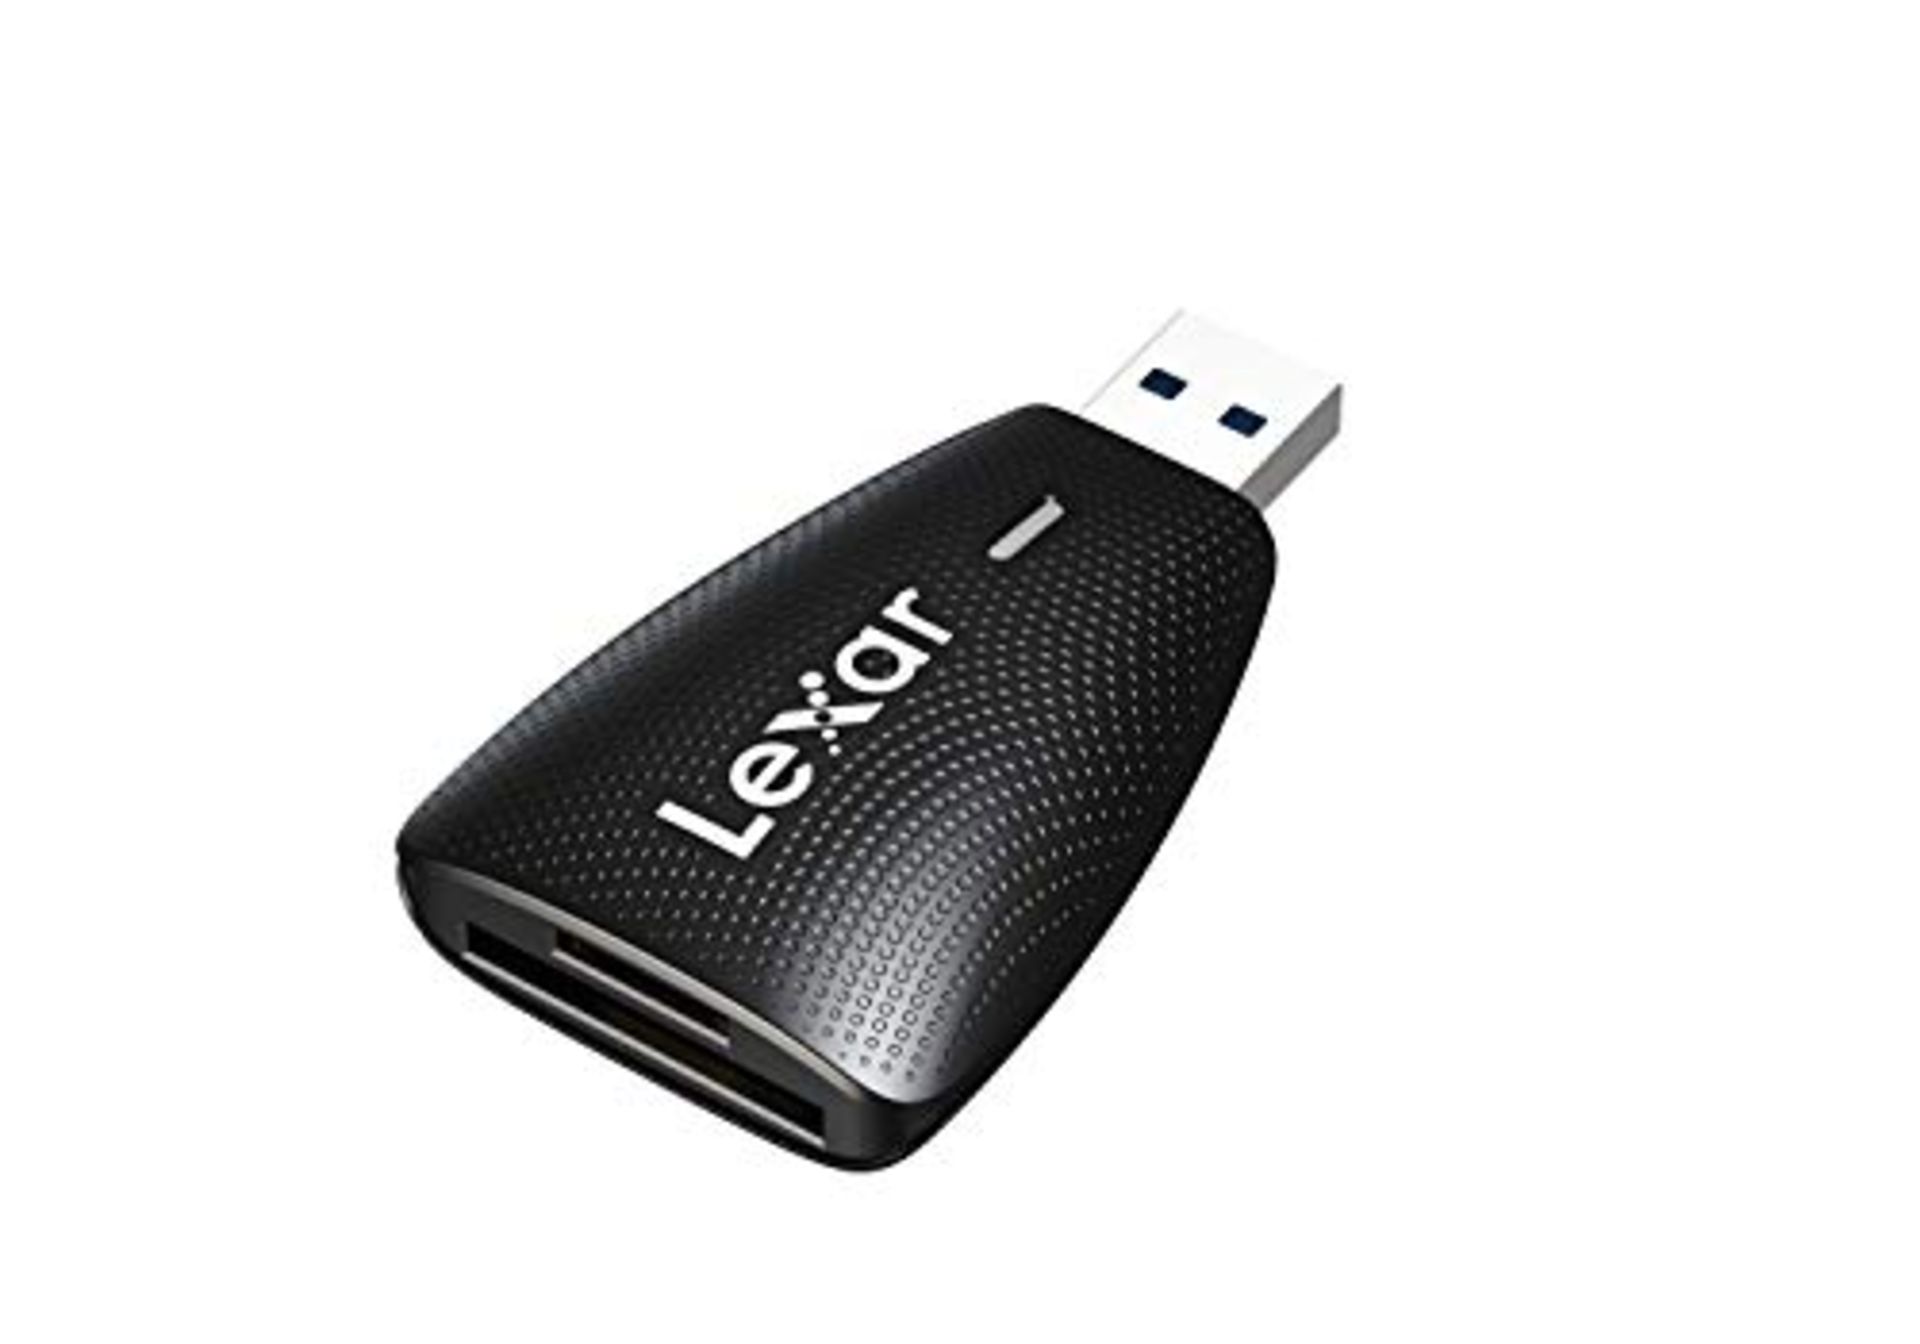 Lexar Multi-Card 2-in-1 USB 3.1 External Card Reader, Up to 312 MB/s for UHS-I UHS-II